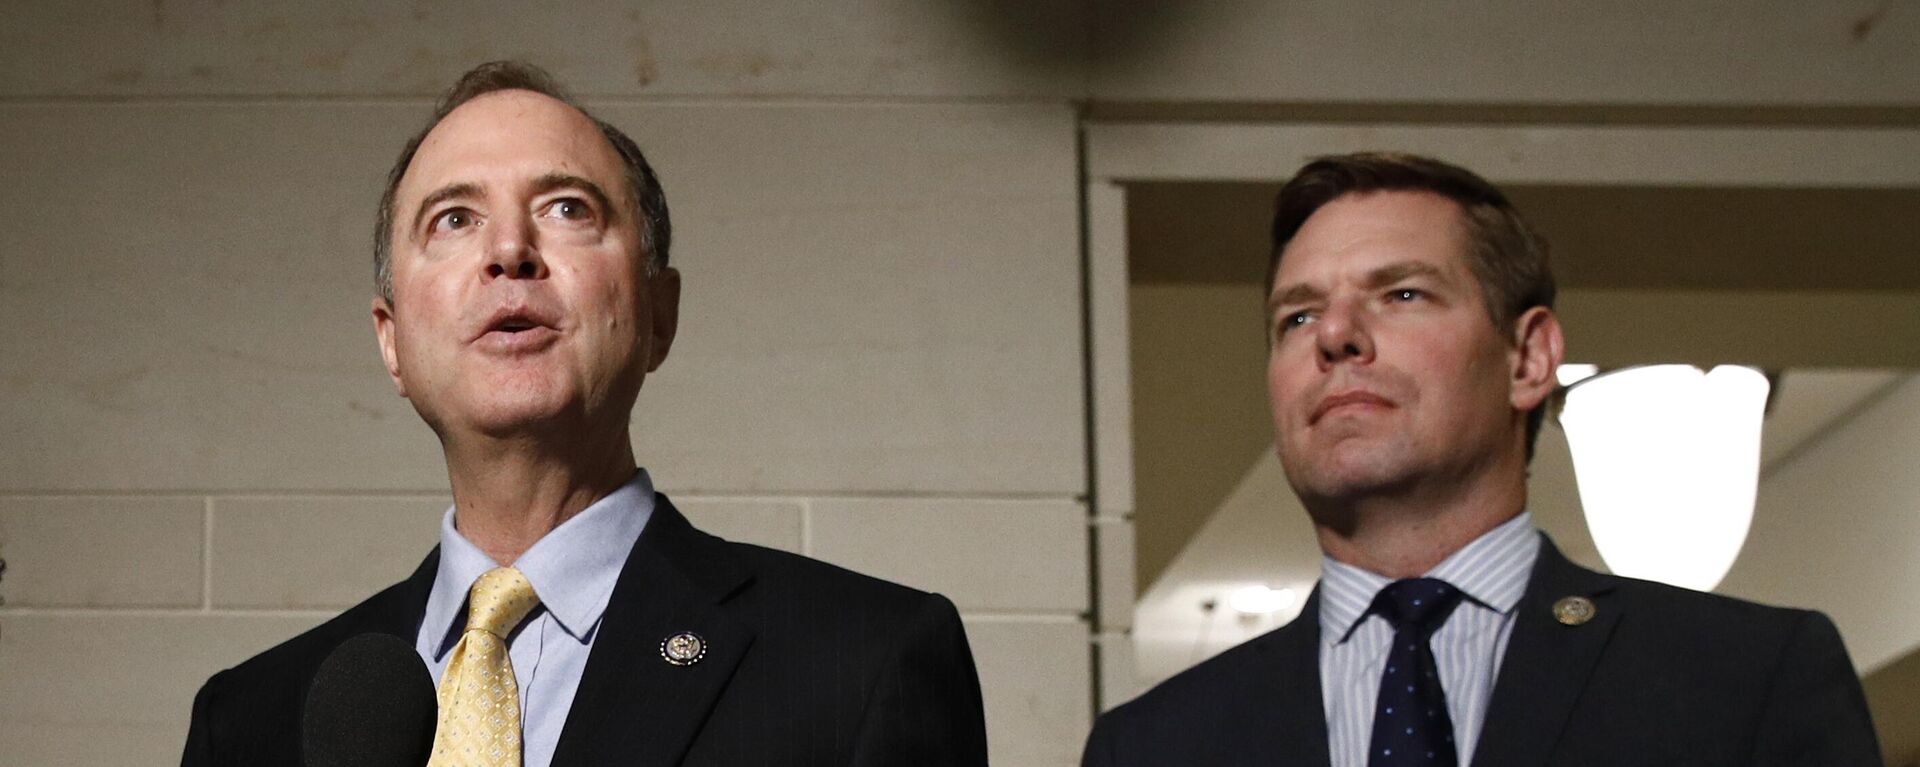 FILE - In this May 28, 2019 file photo, Rep. Adam Schiff, D-Calif., left, and Rep. Eric Swalwell, D-Calif., speak with members of the media on Capitol Hill in Washington. The Justice Department under former President Donald Trump secretly seized data from the accounts of at least two Democratic lawmakers in 2018 as part of an aggressive crackdown on leaks related to the Russia investigation and other national security matters, according to three people familiar with the seizures. - Sputnik International, 1920, 25.01.2023